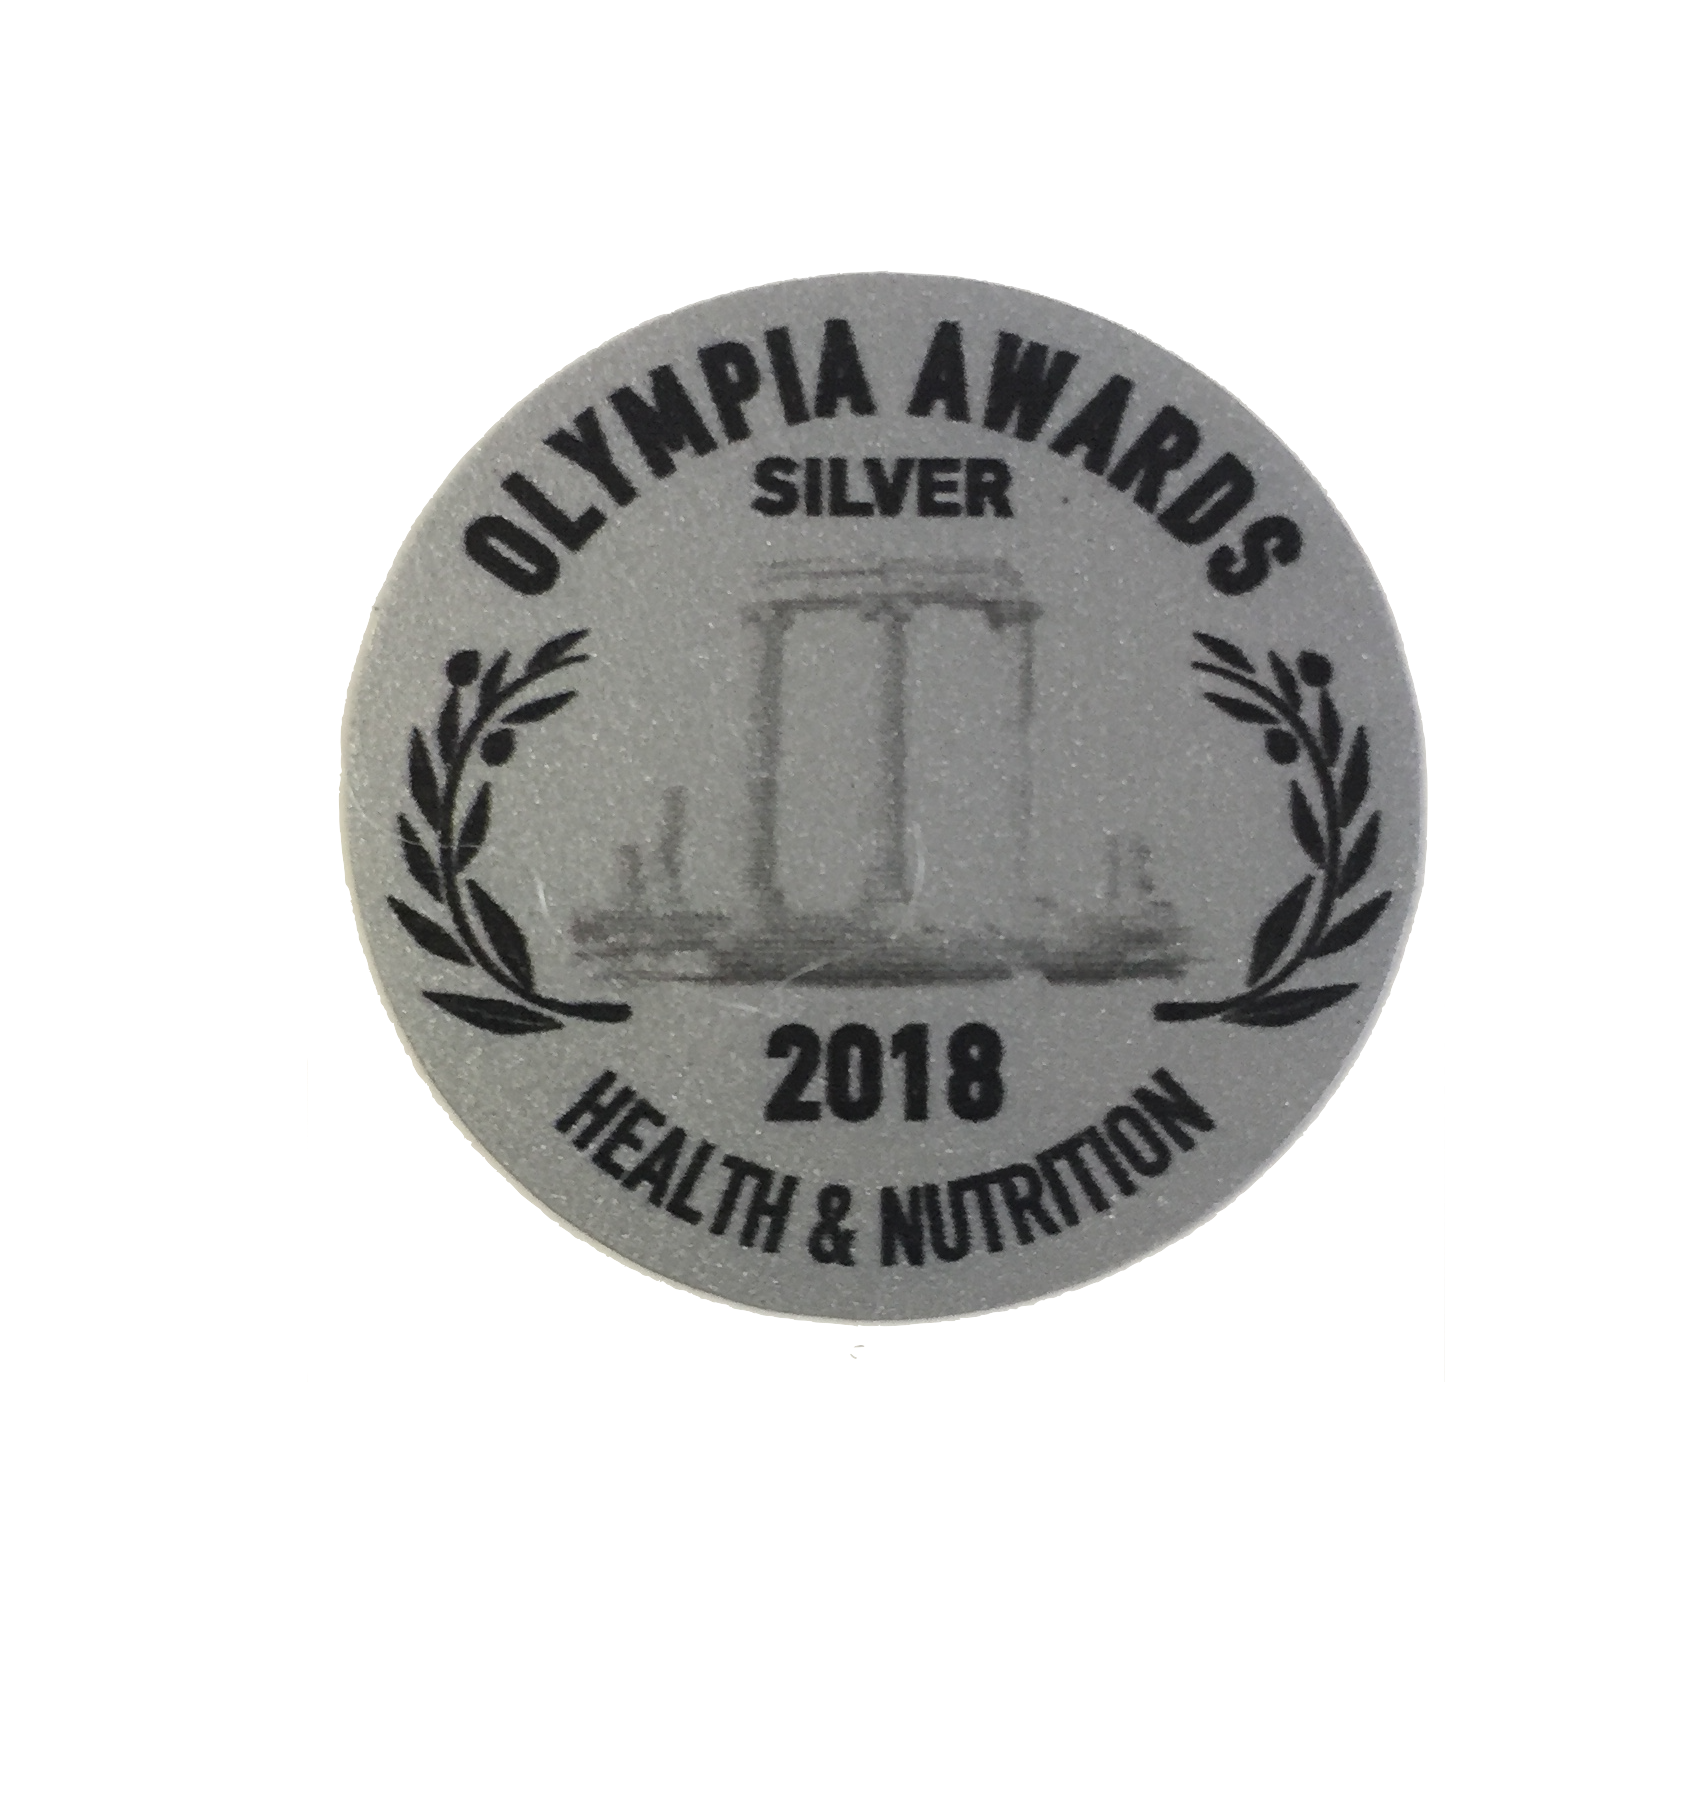 The Olympia Health & Nutrition Awards committee